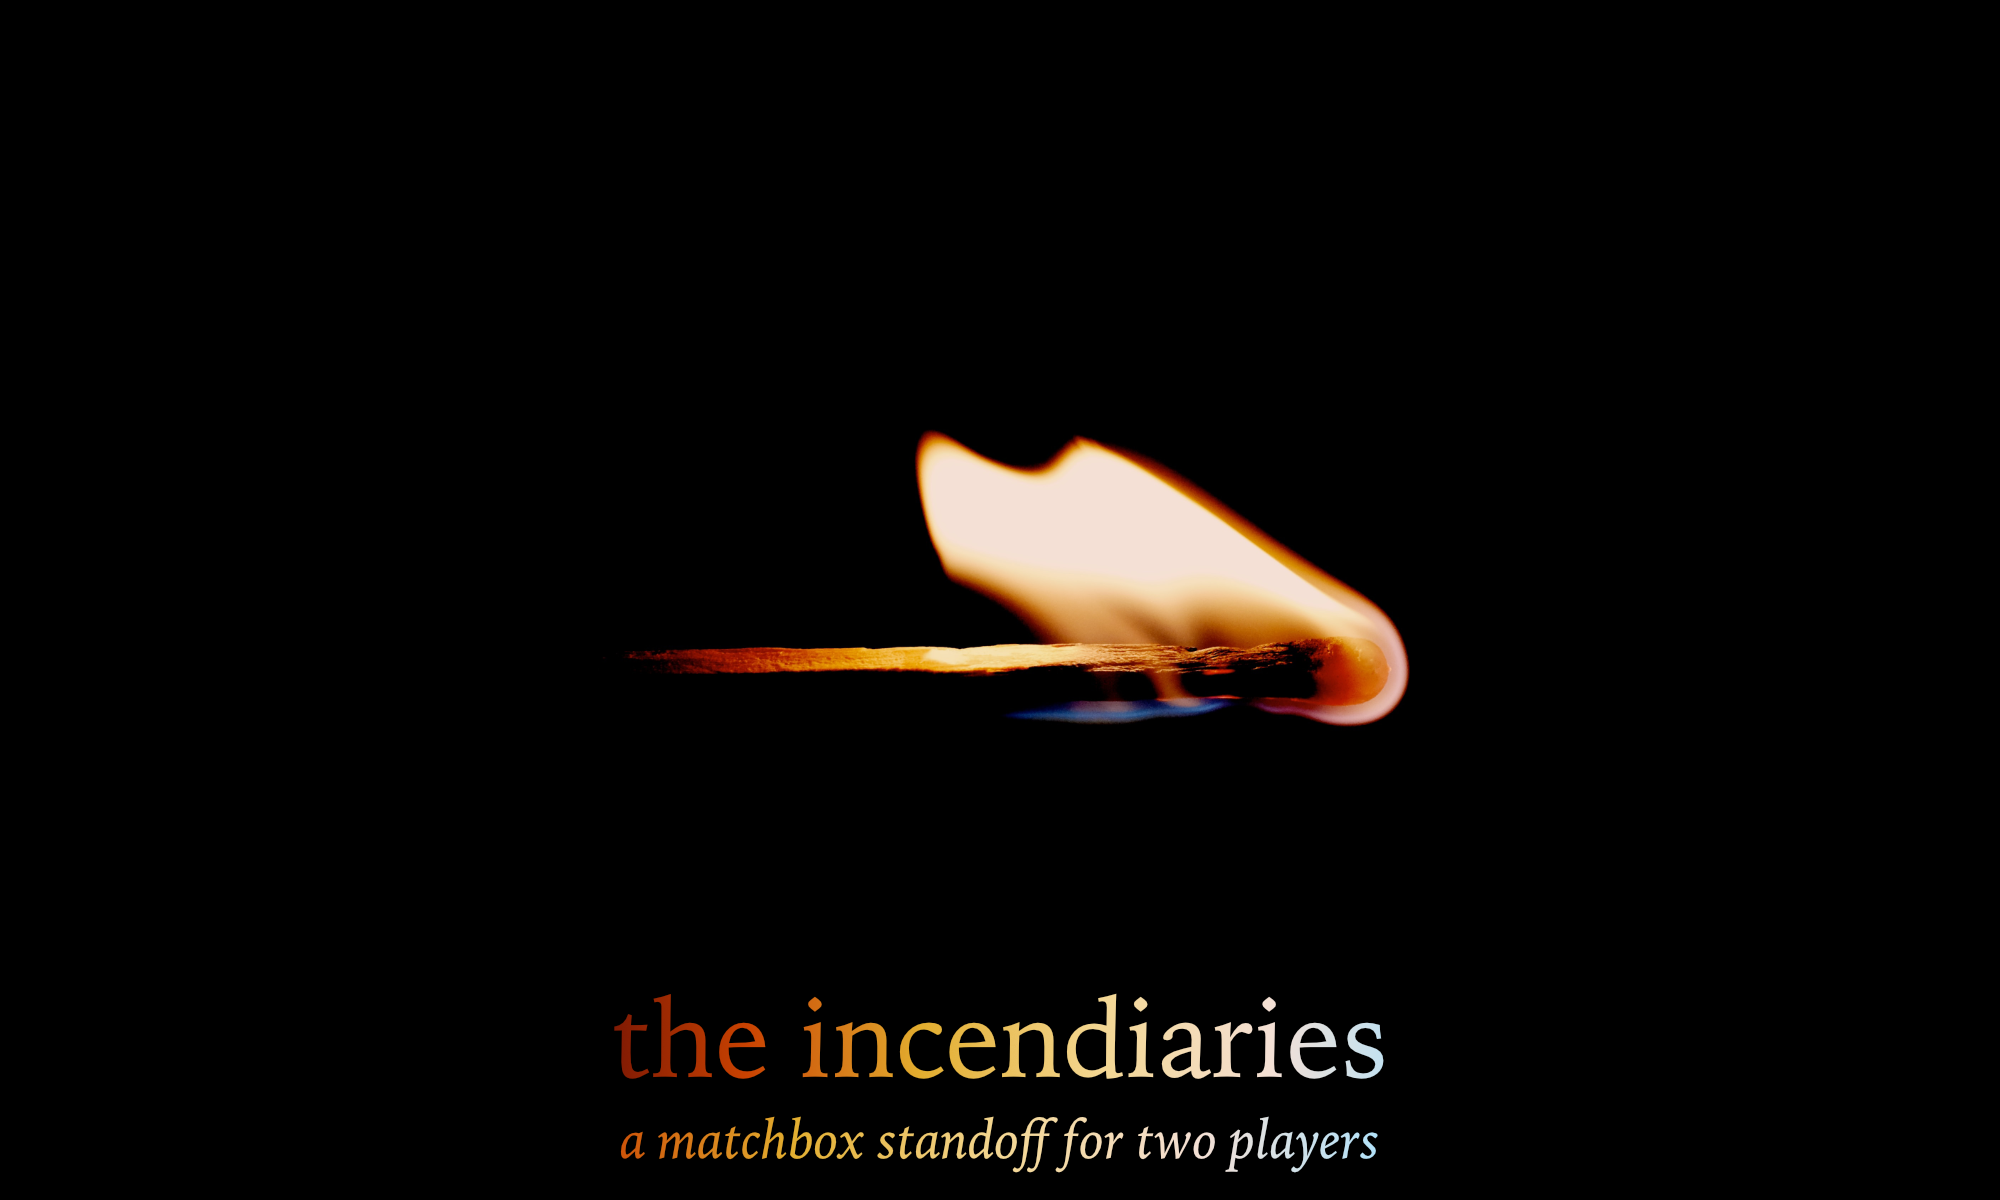 The Incendiaries